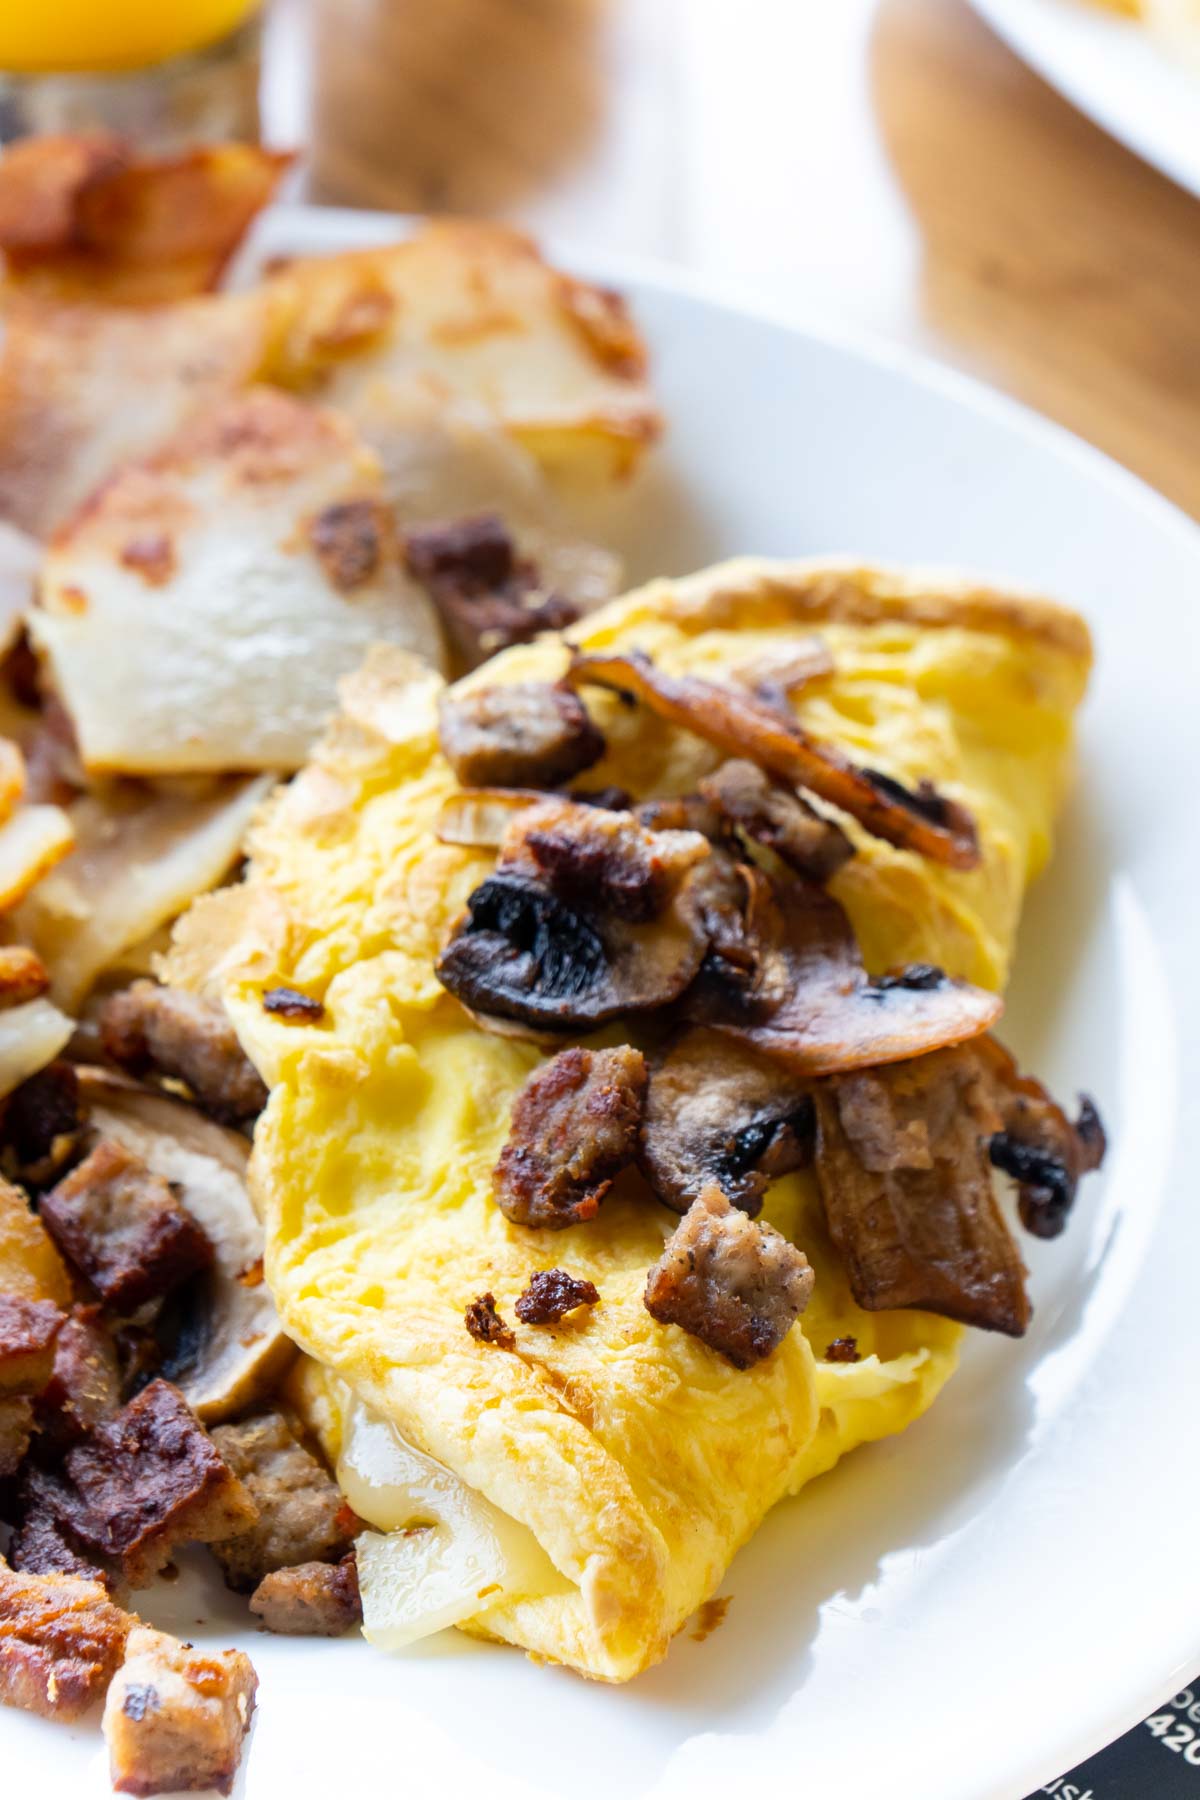 omelet with mushrooms on top